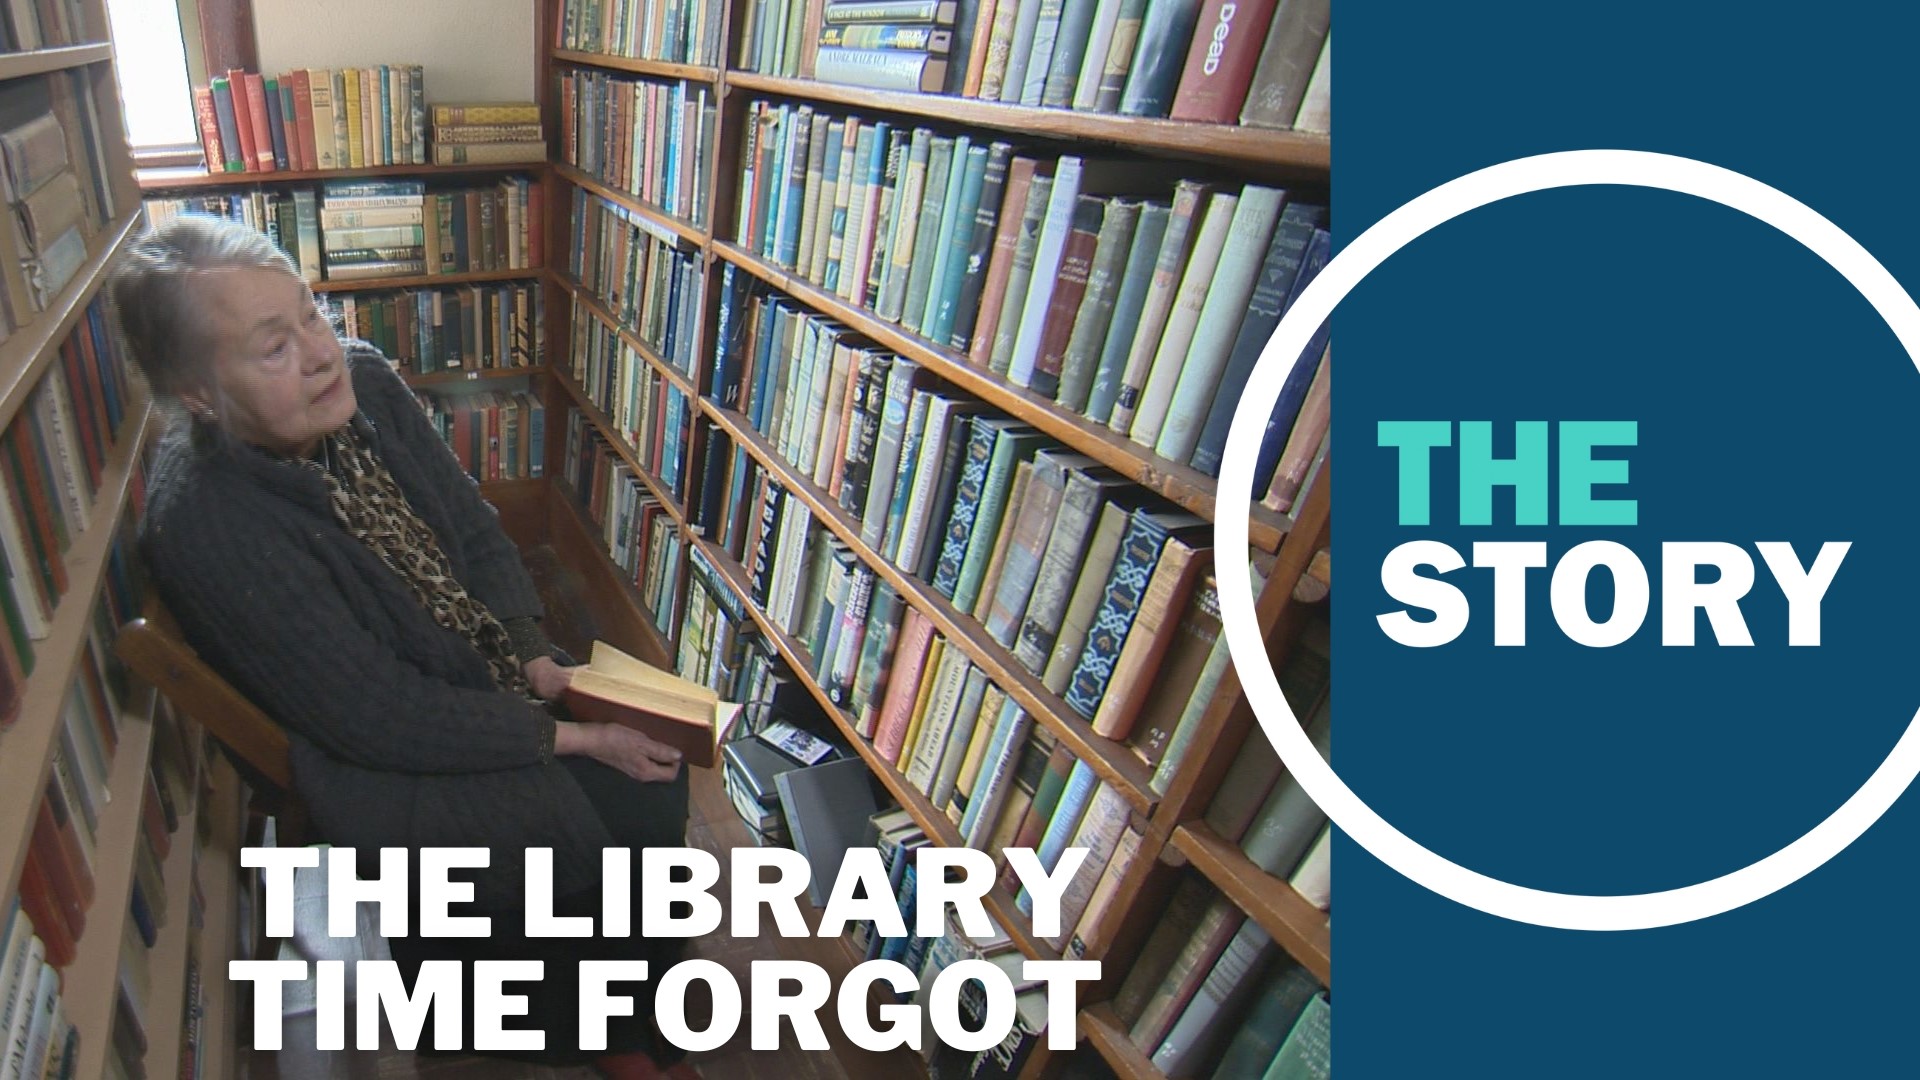 Every Monday for a decade — but one — Amelie Redman has opened the doors of the historic little Grand Ronde Library for the curious to discover and share.